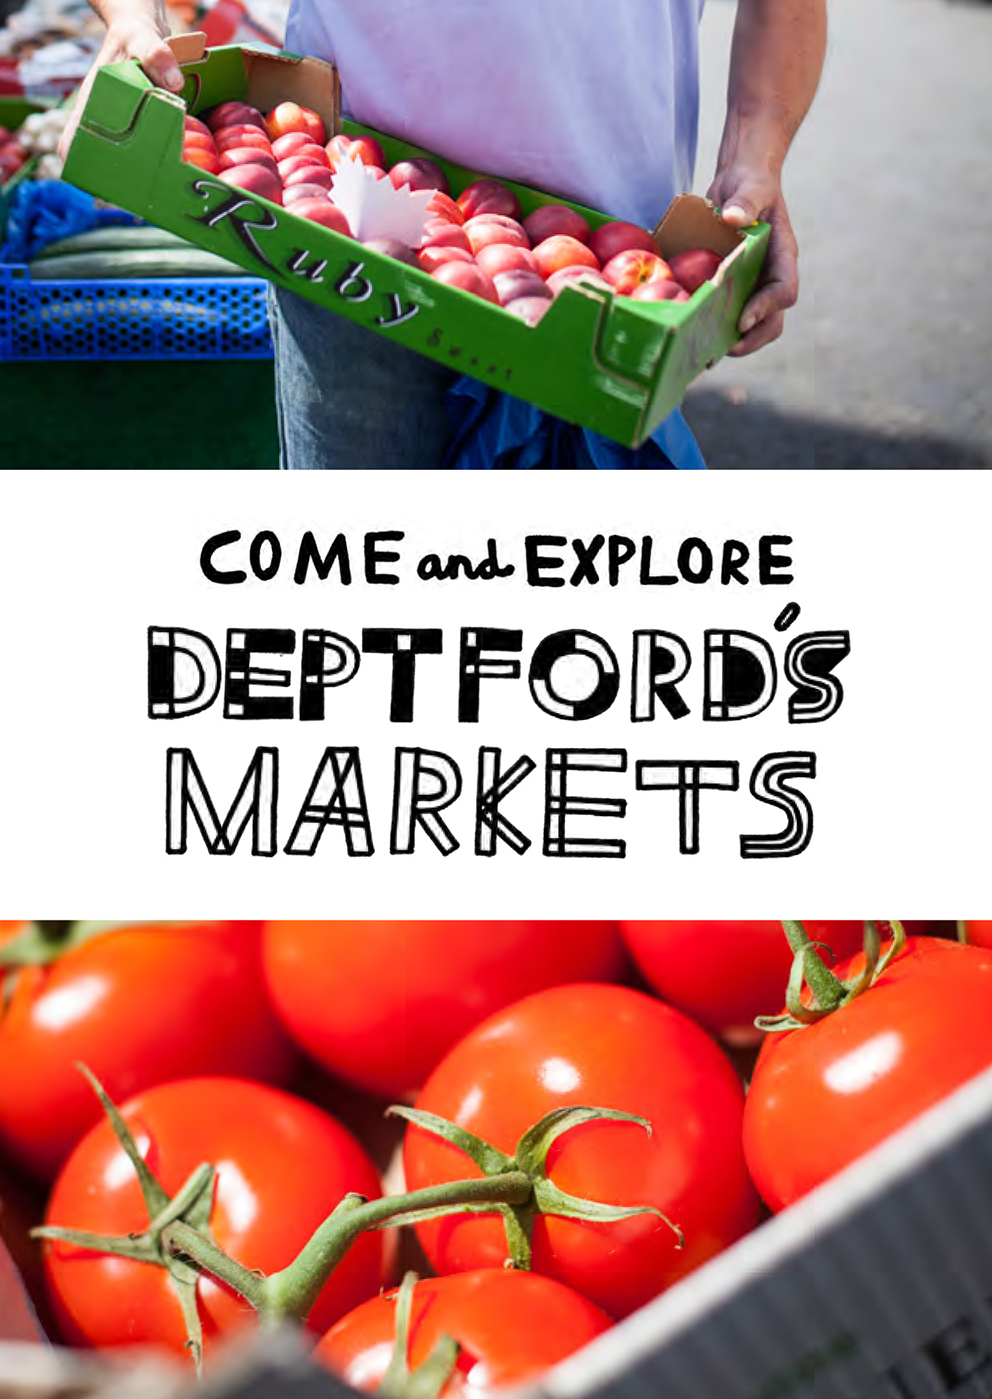 Pocket sized booklet about the Deptford Markets, distributed to 20,000 market goers and bargain hunters across London. Part of The Deptford Project.